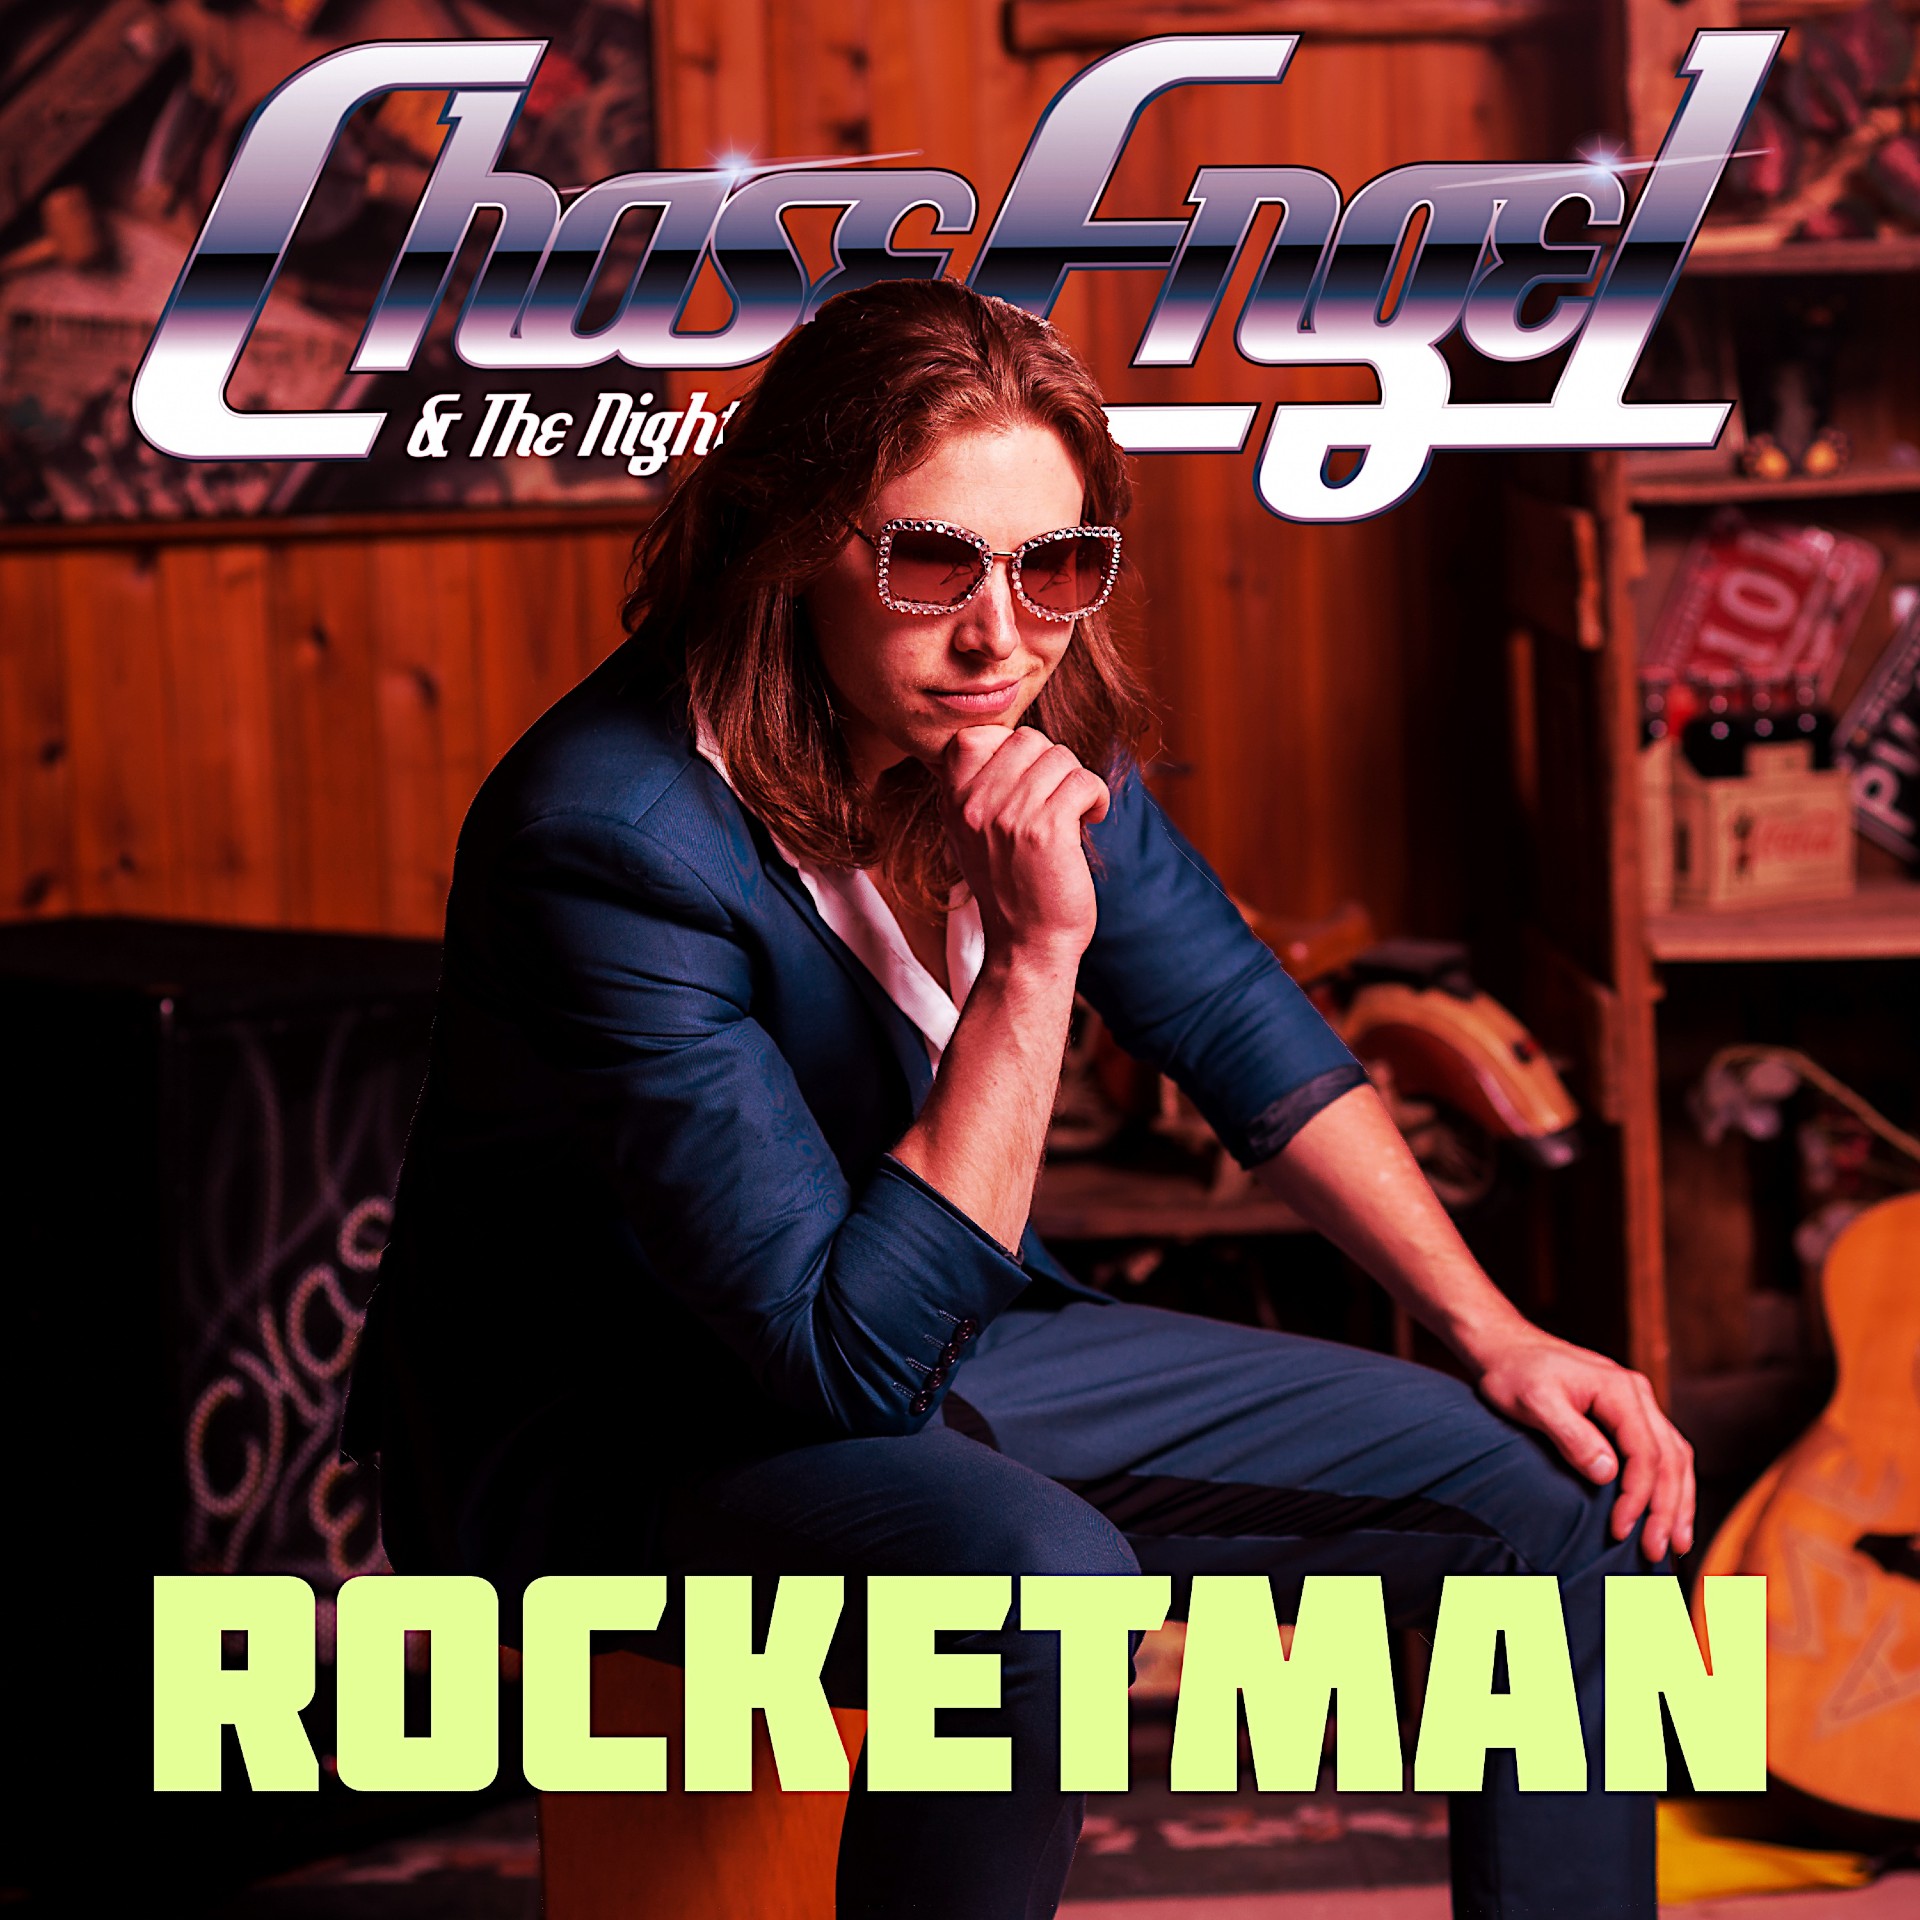 Artwork for the single “Rocket Man” by Chase Engel and the Nightshift